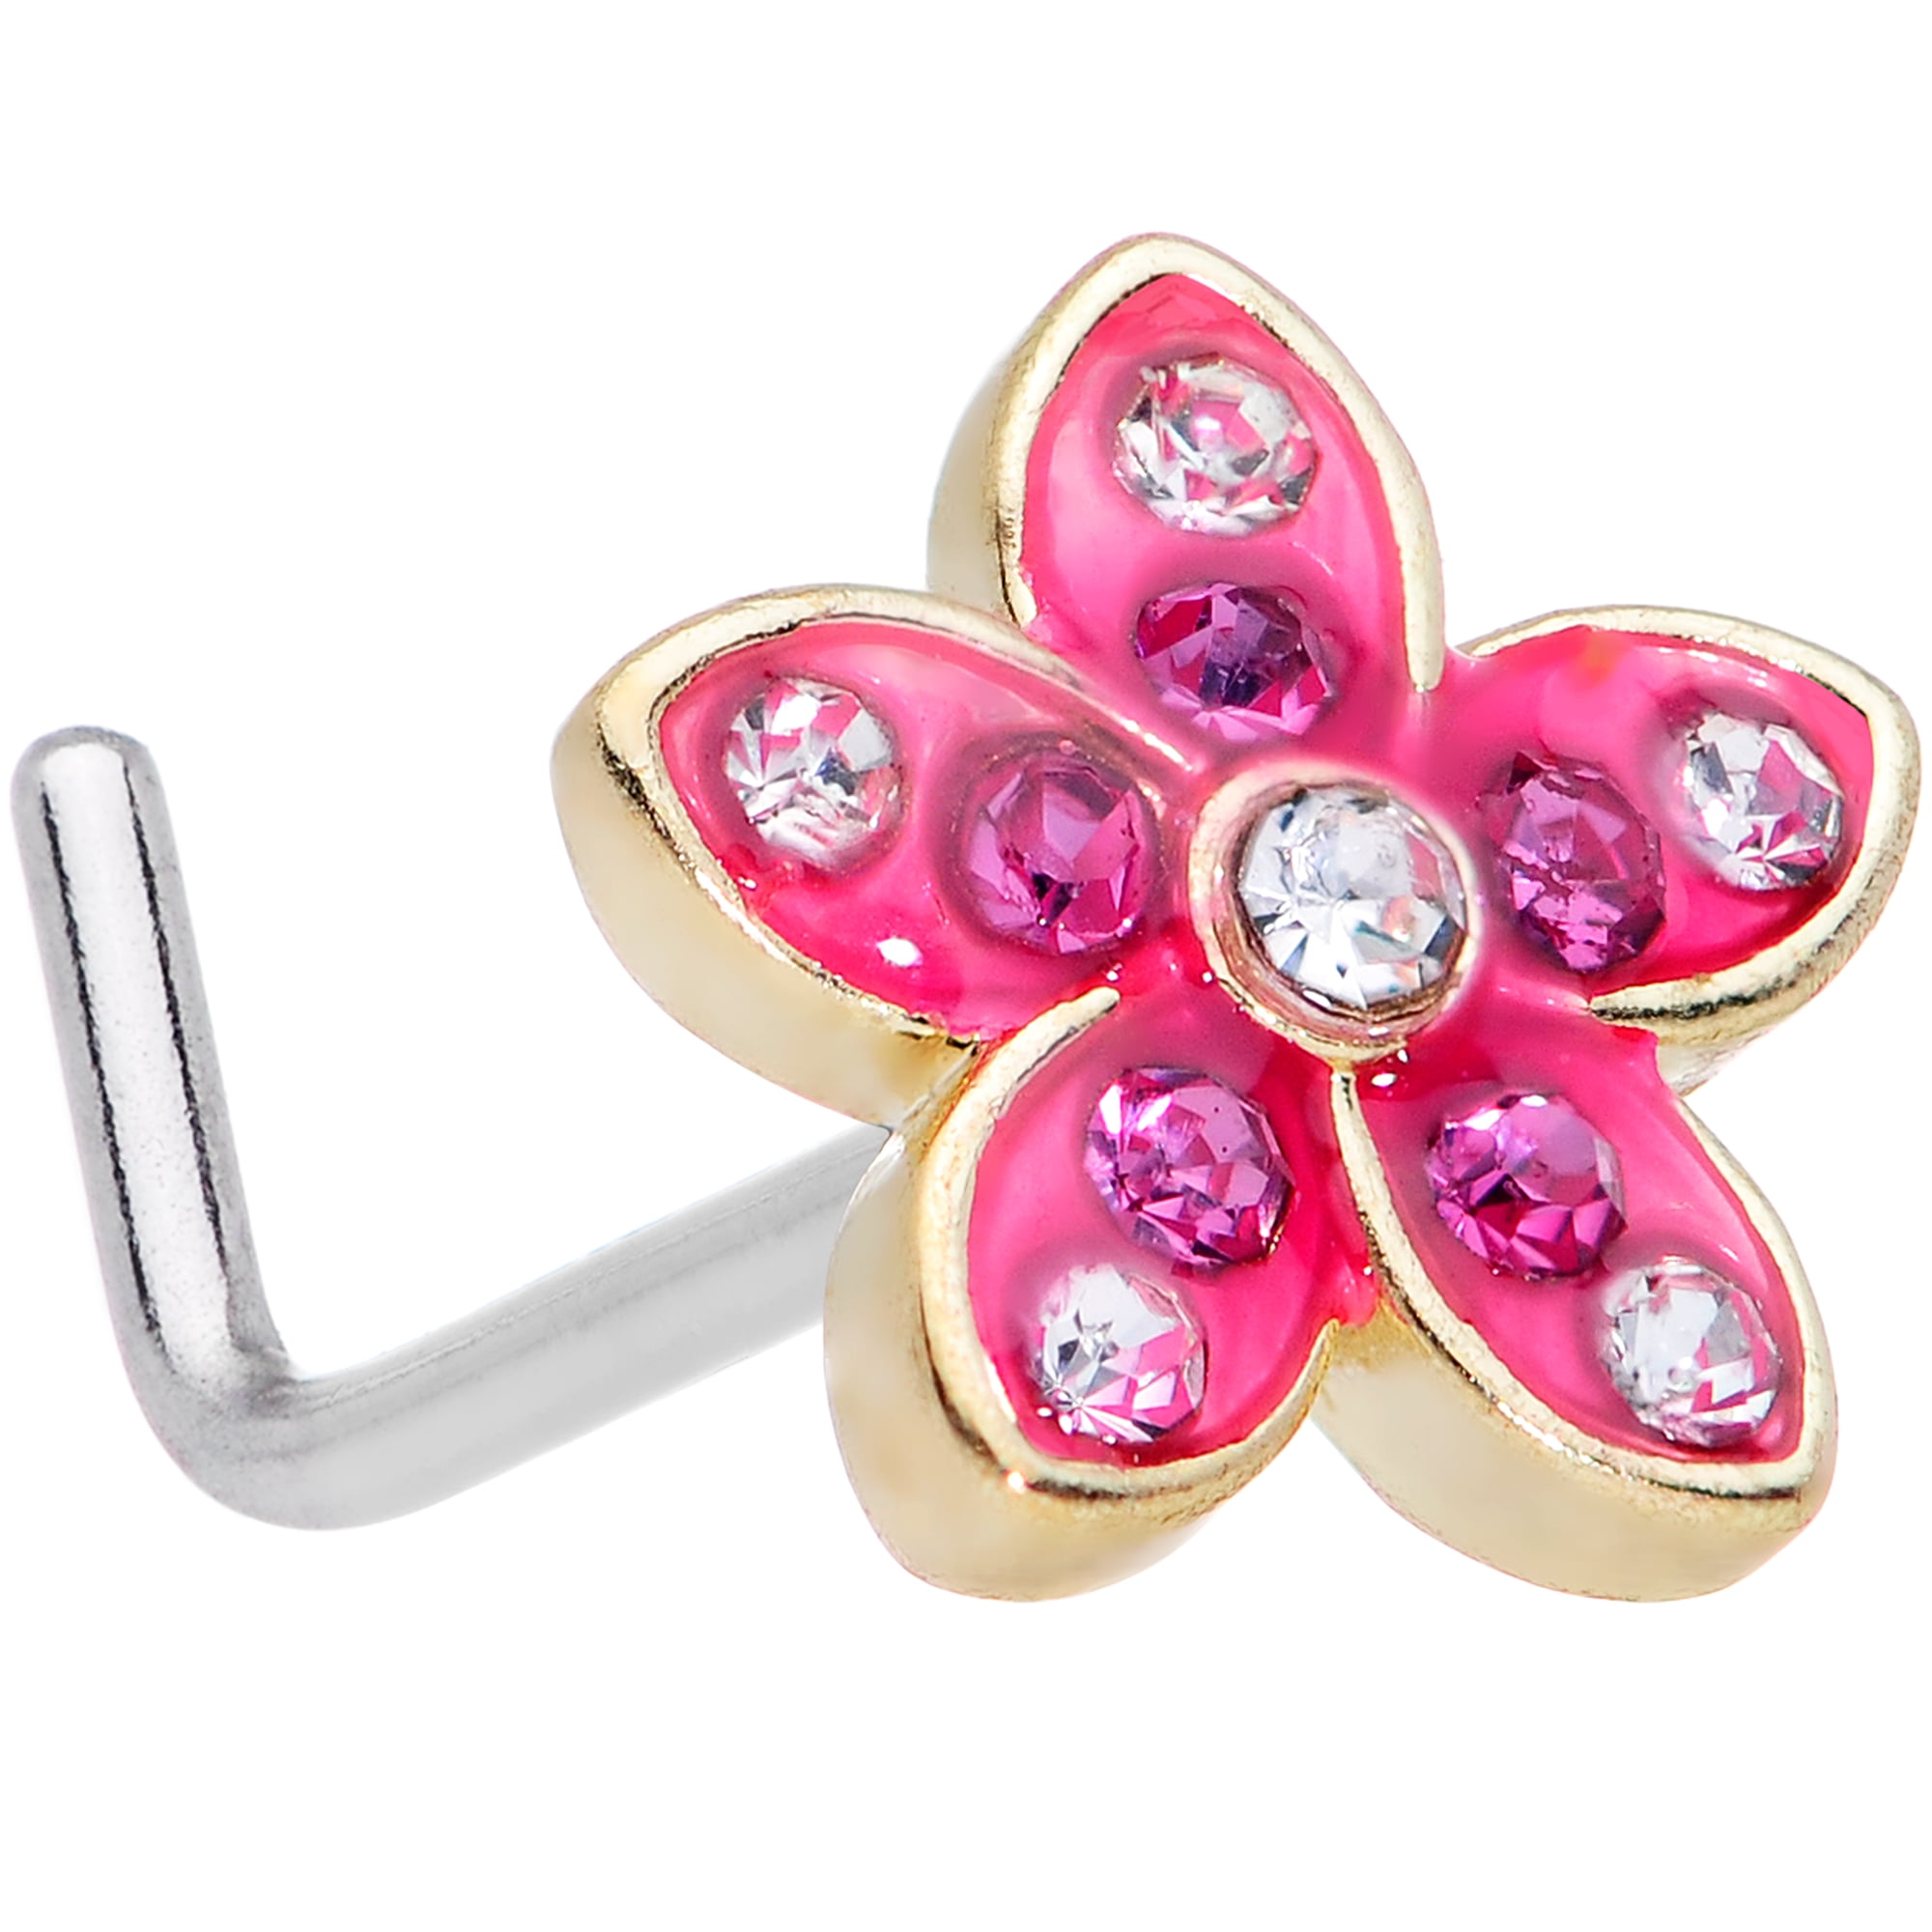 Body Candy Women 20G Steel L Shaped Nose Ring Purple Accent Pink Flower  Nose Stud Body Piercing Jewelry 1/4